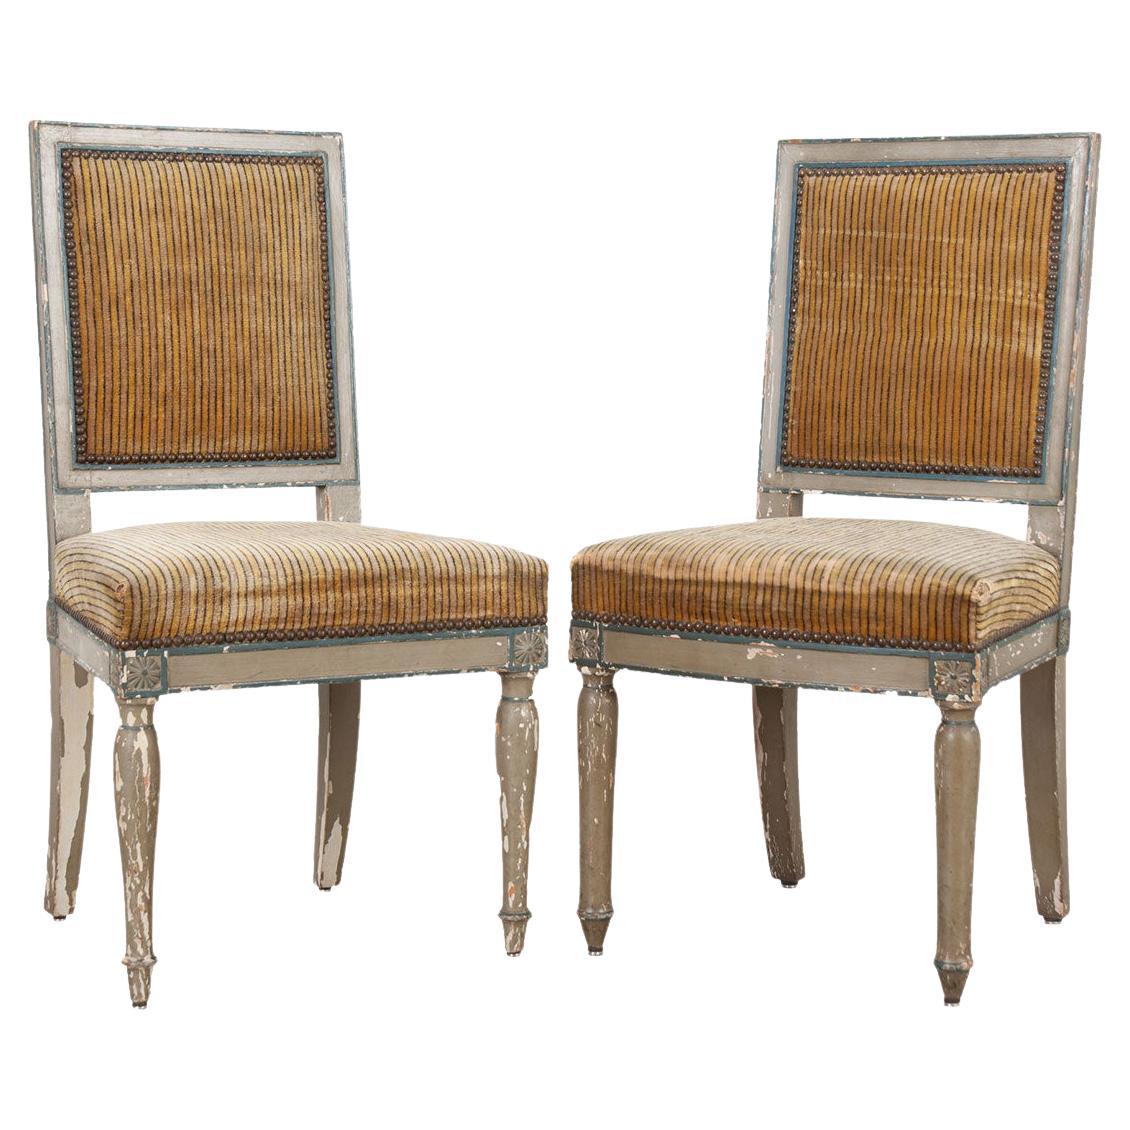 Pair of French 19th Century Directoire Chairs